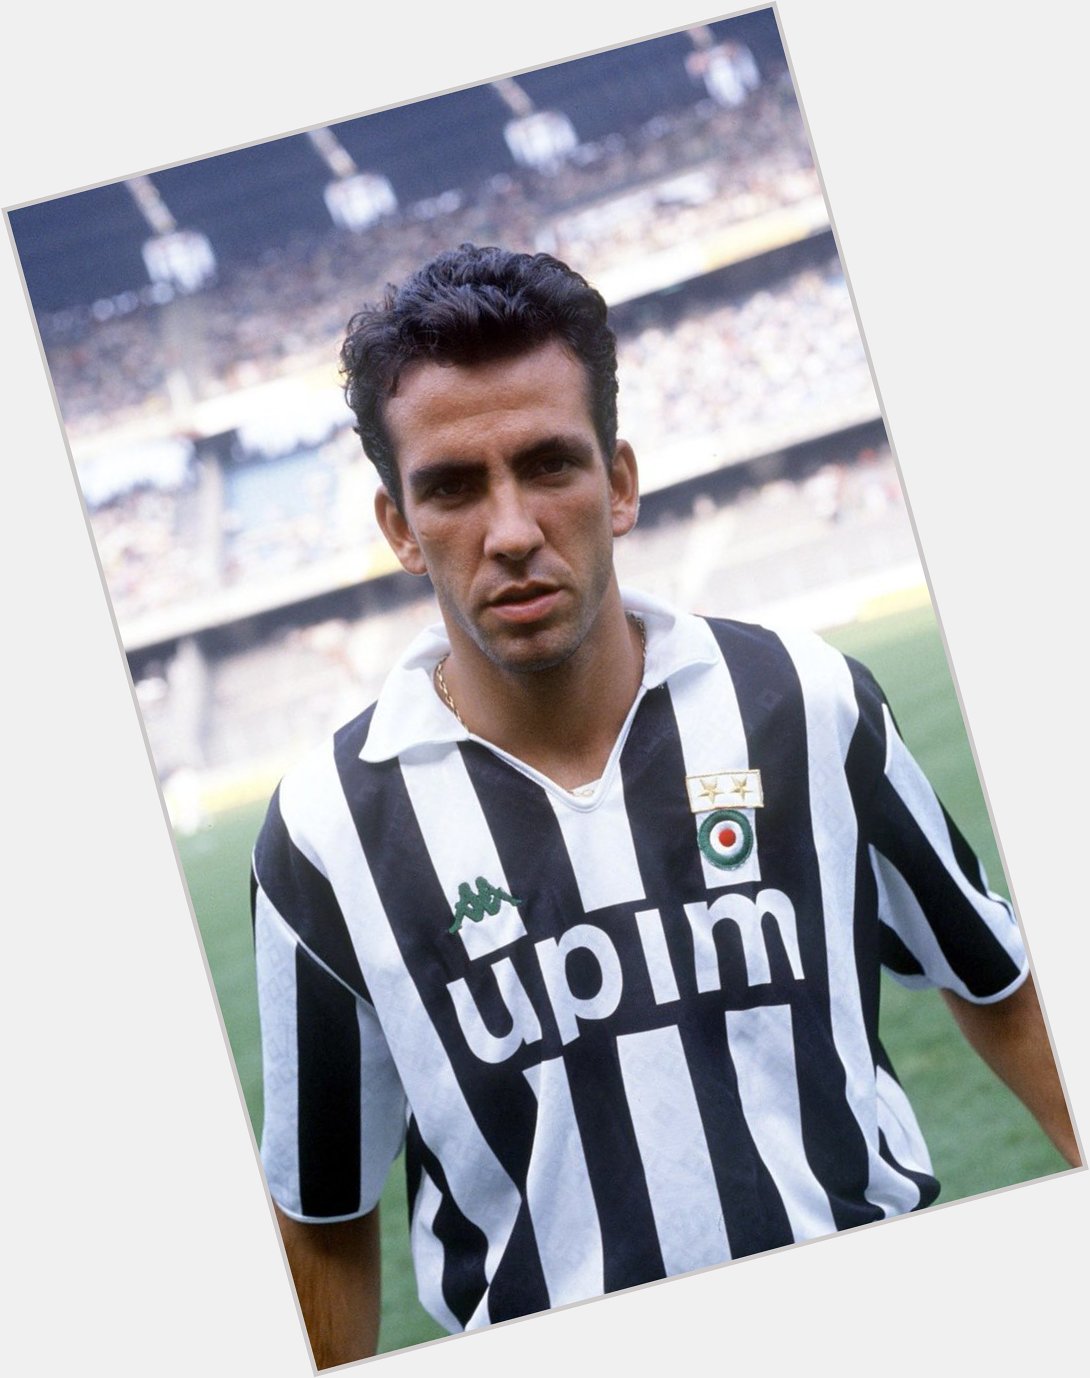 Happy birthday to former Juventus midfielder/striker Paolo Di Canio, who turns 49 today.

Games: 112
Goals: 7 : 1 